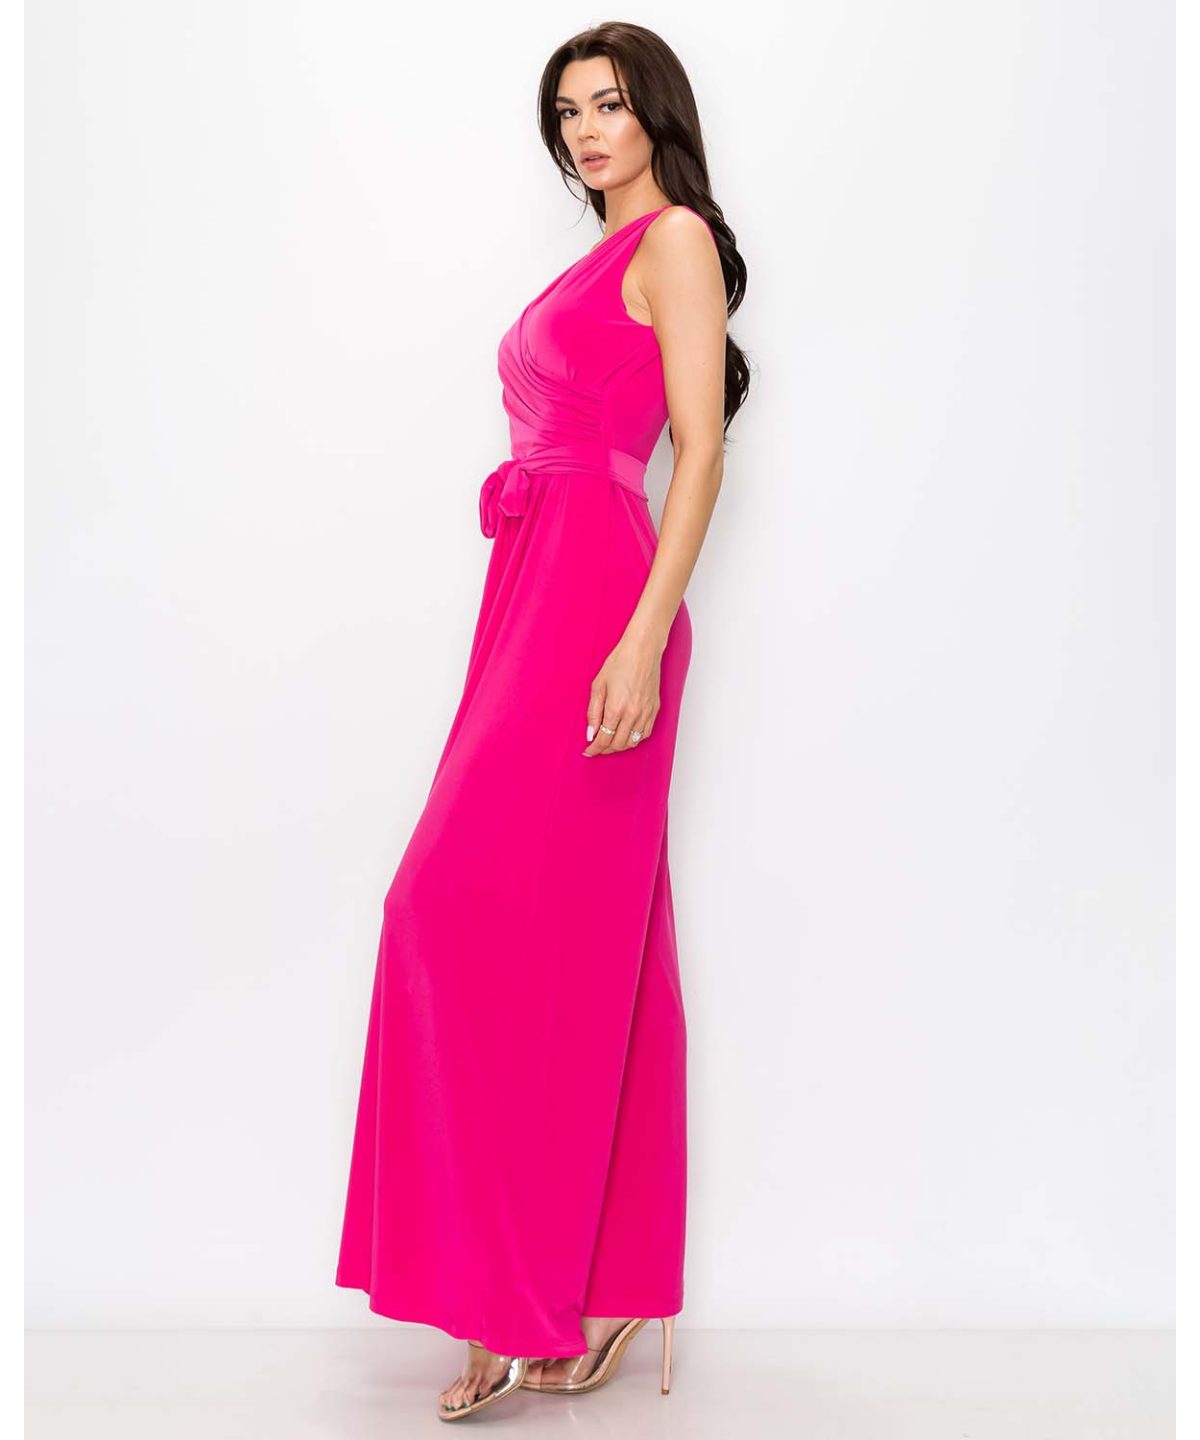 Last Tango MS522 Fuchsia Women's Jumpsuit | Ooh Ooh Shoes women's clothing and shoe boutique located in Naples and Mashpee